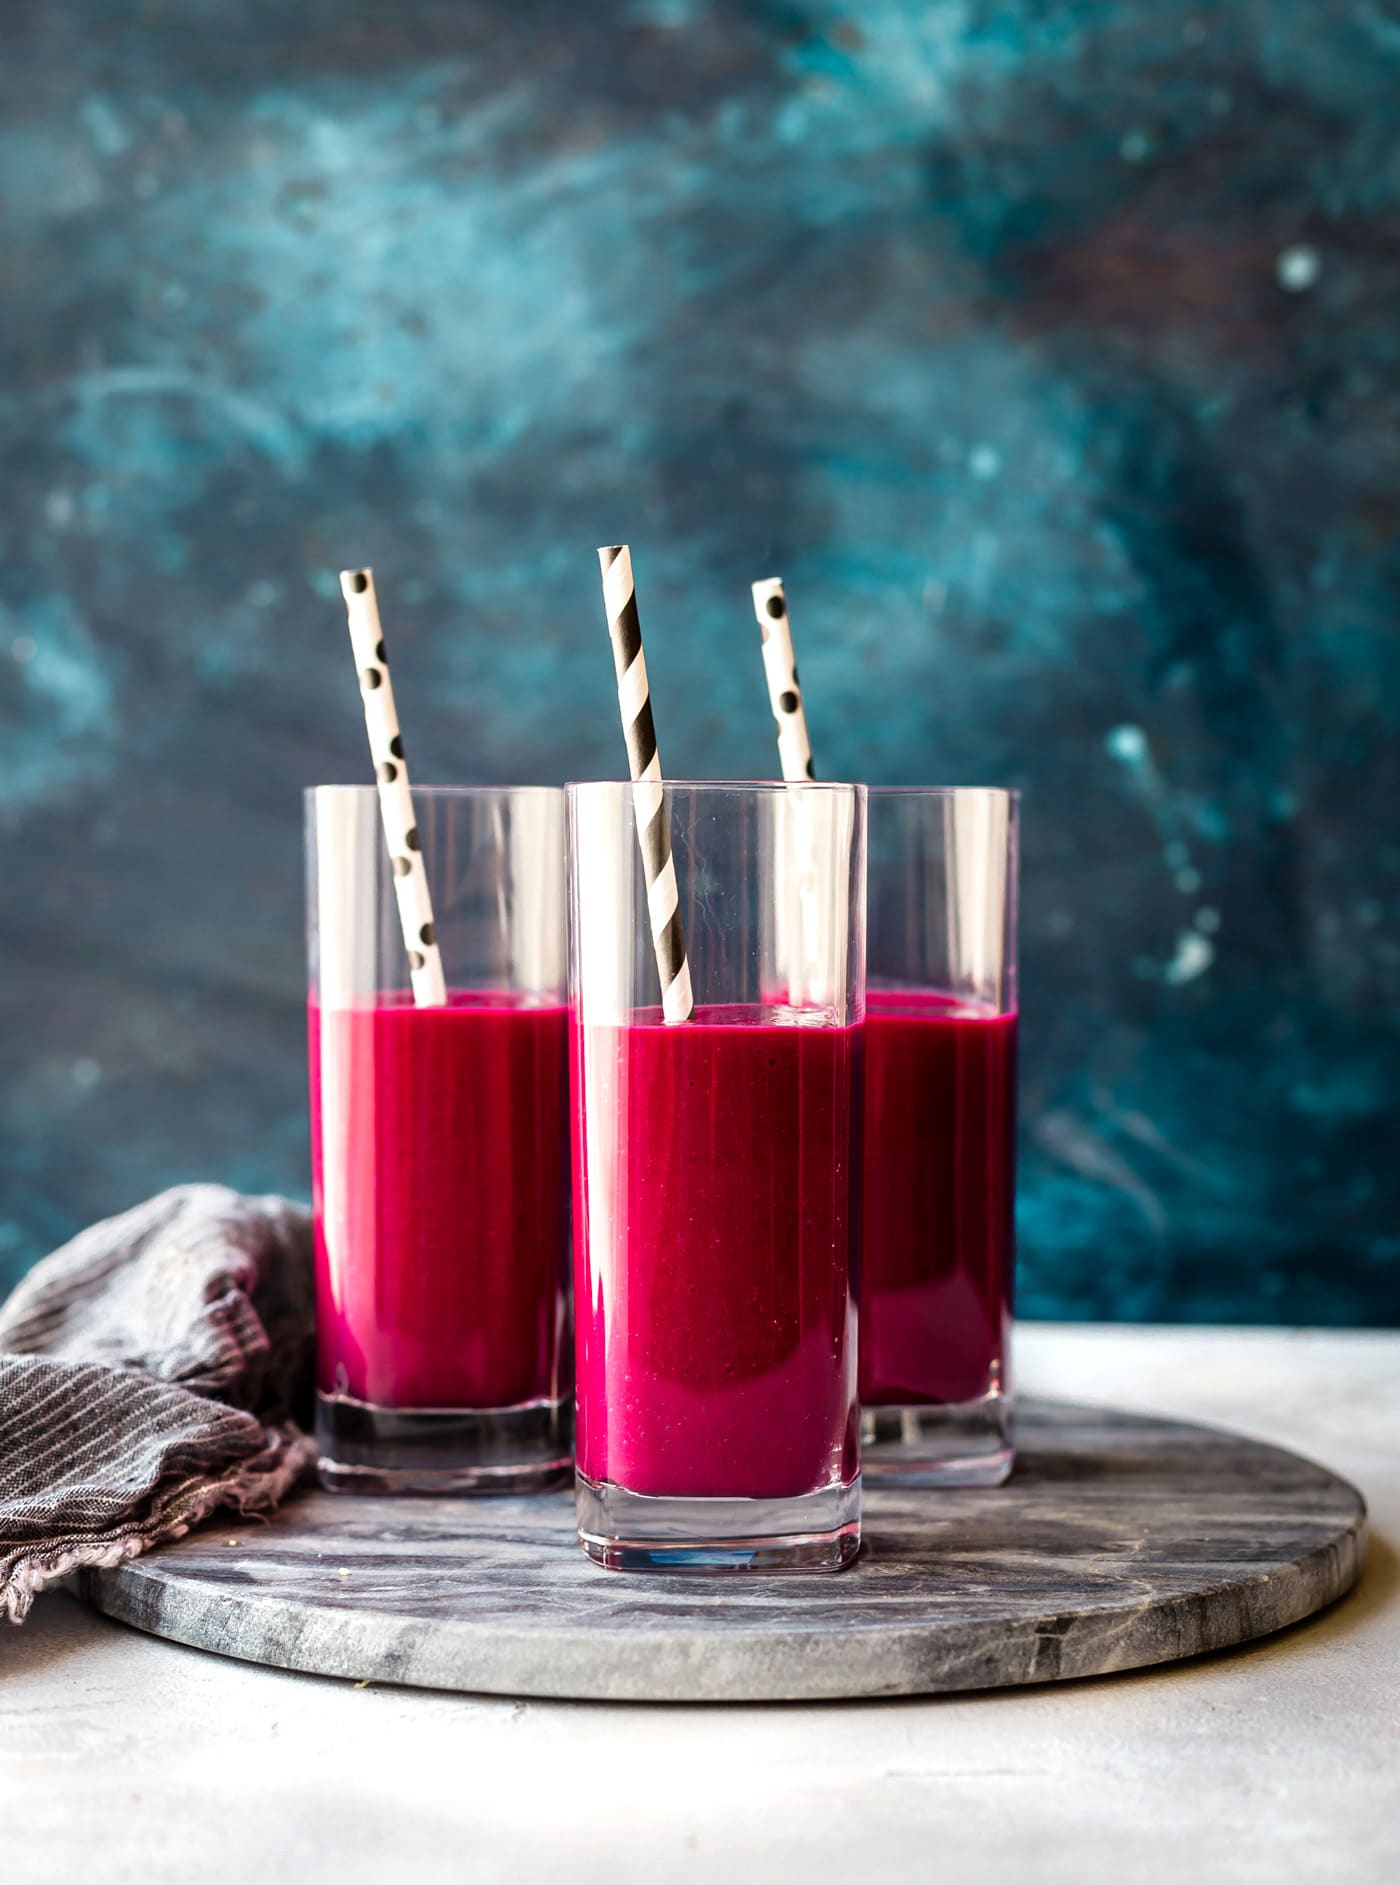 These Super Red SuperFood Smoothies are packed with a nutrient dense ingredients to boost energy, stamina, and vitality! Superfood Smoothies with hidden veggies, silky smooth almond coconut milk, and tropical fruits. Healthy, wholesome, paleo, and vegan friendly!